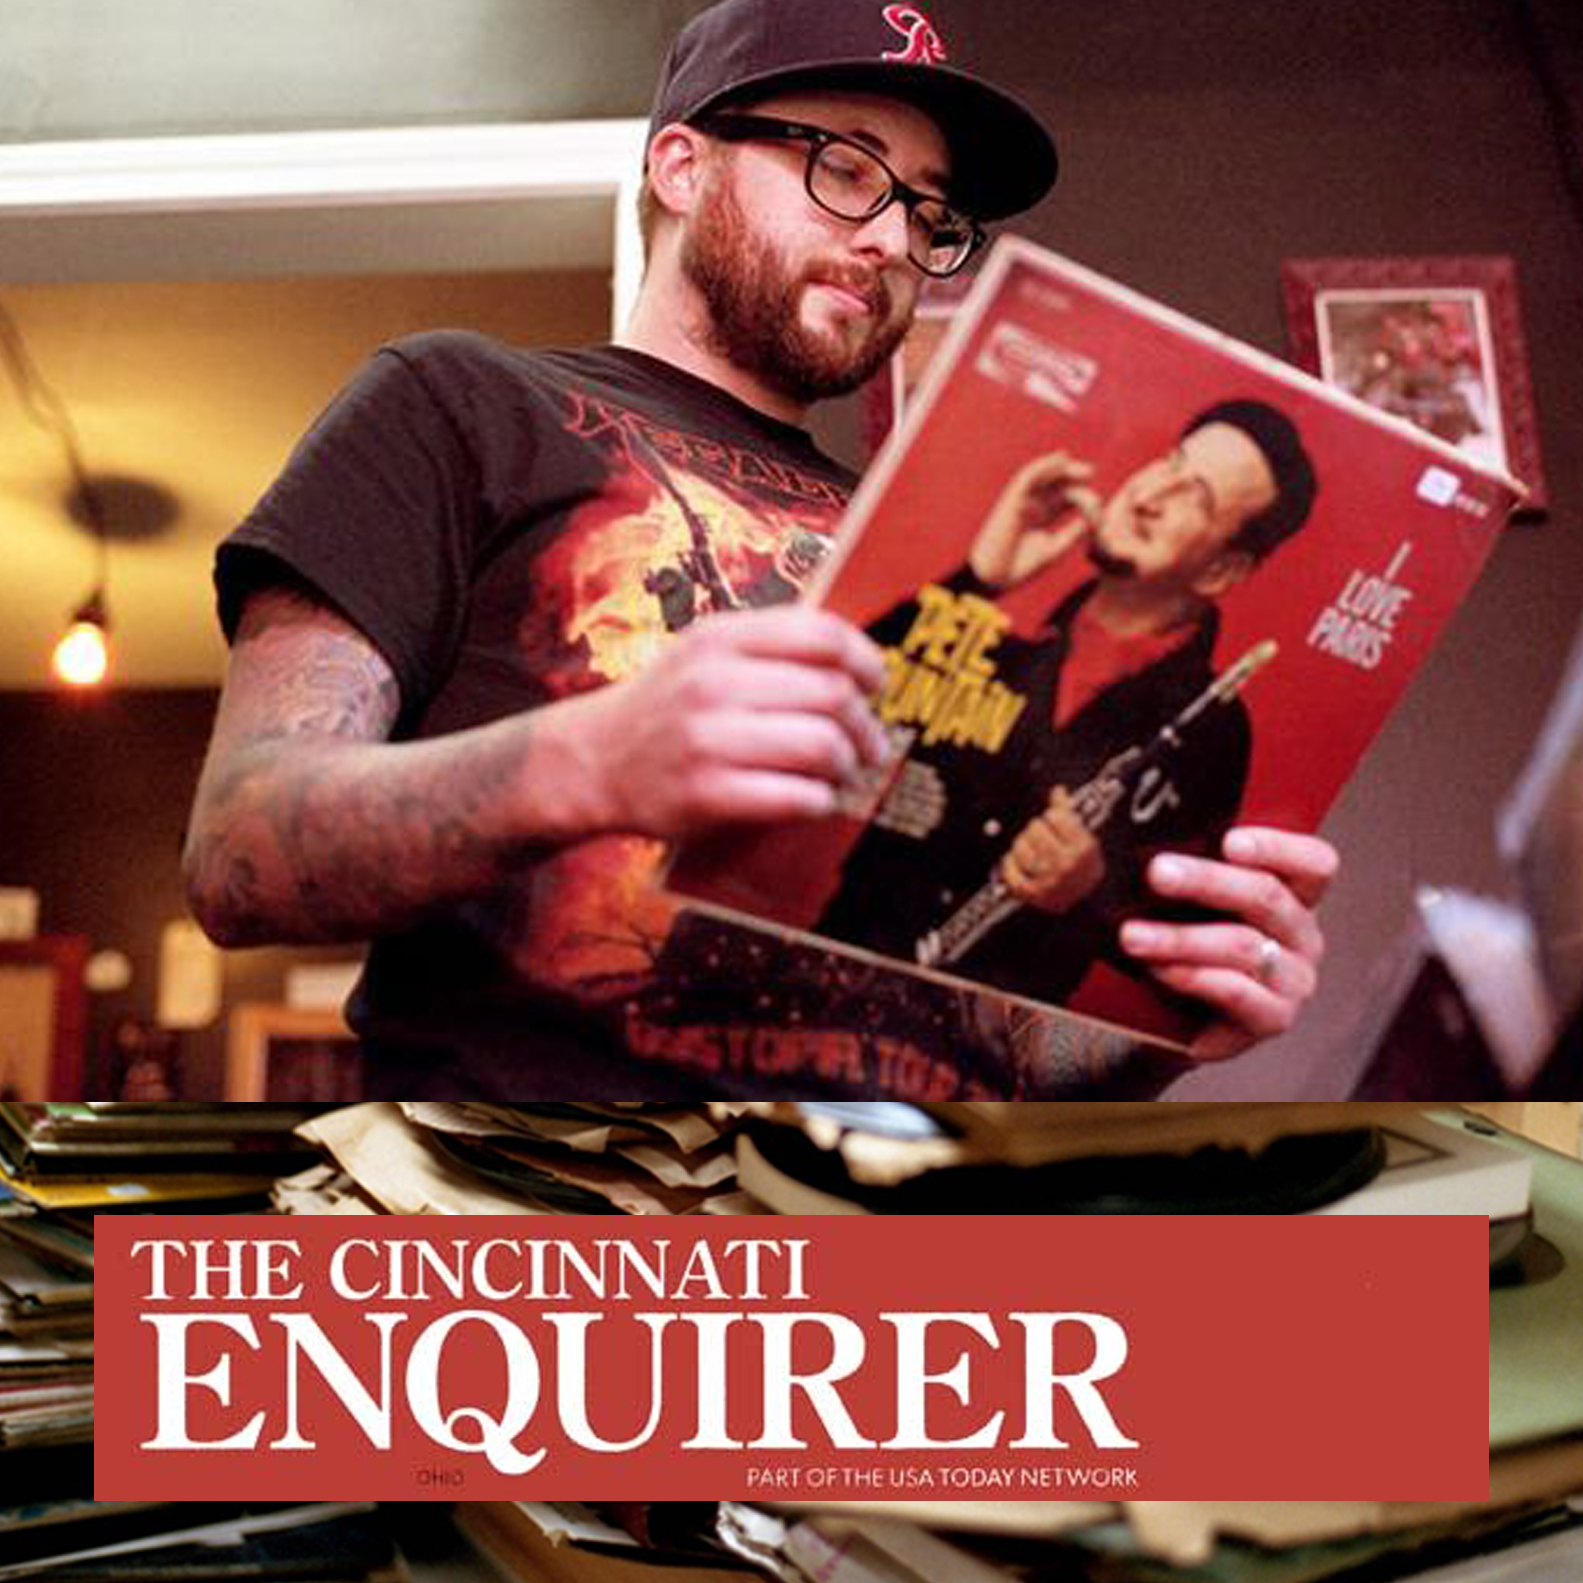 CINCINNATI ENQUIRER – Cincinnati record stores are booming. This book explains why.